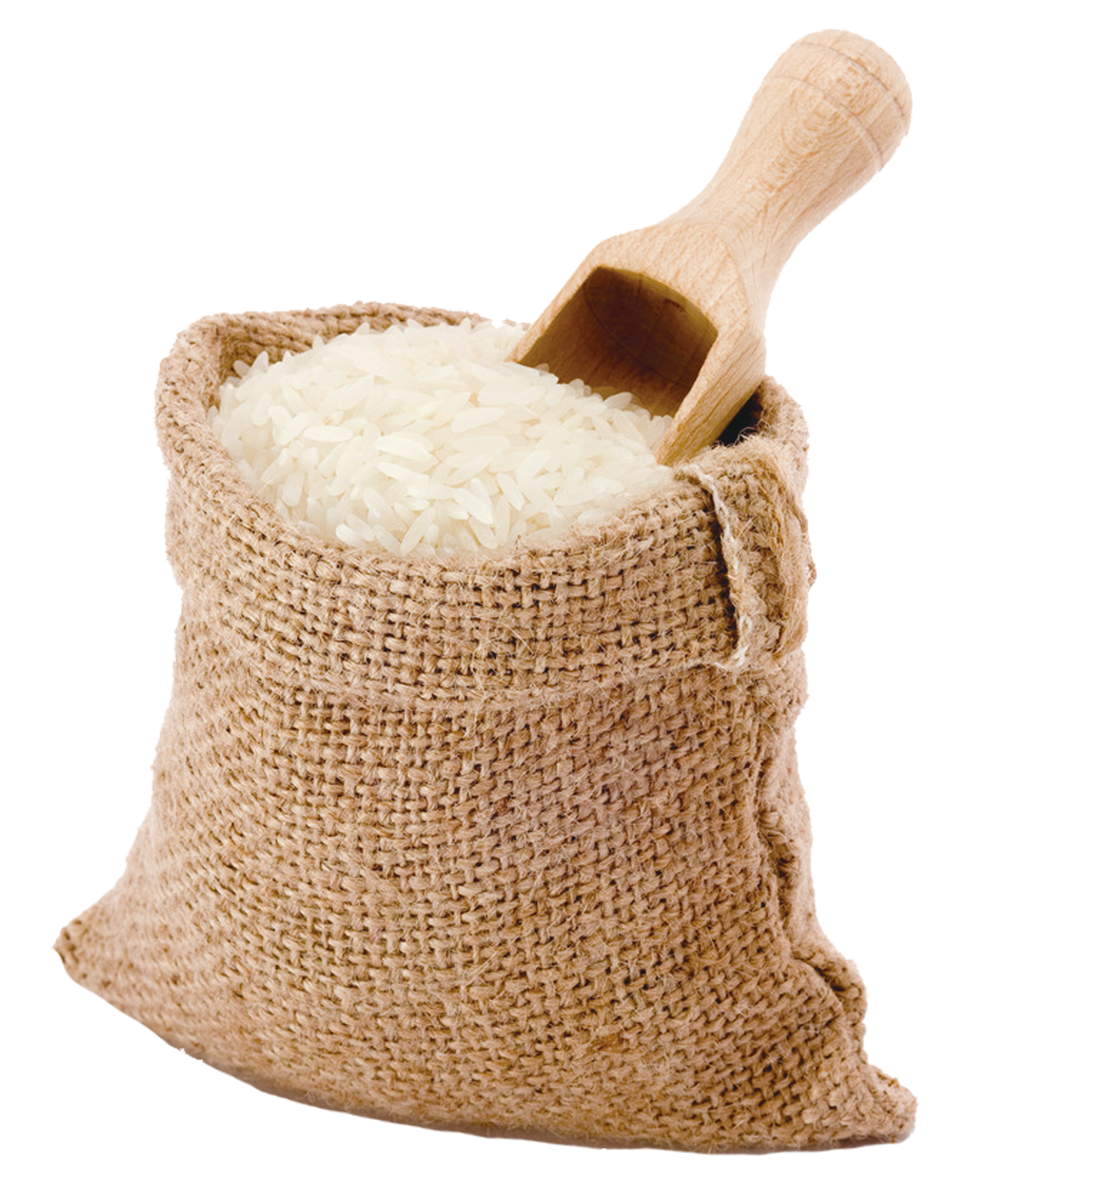 White Rice PNG Transparent Image